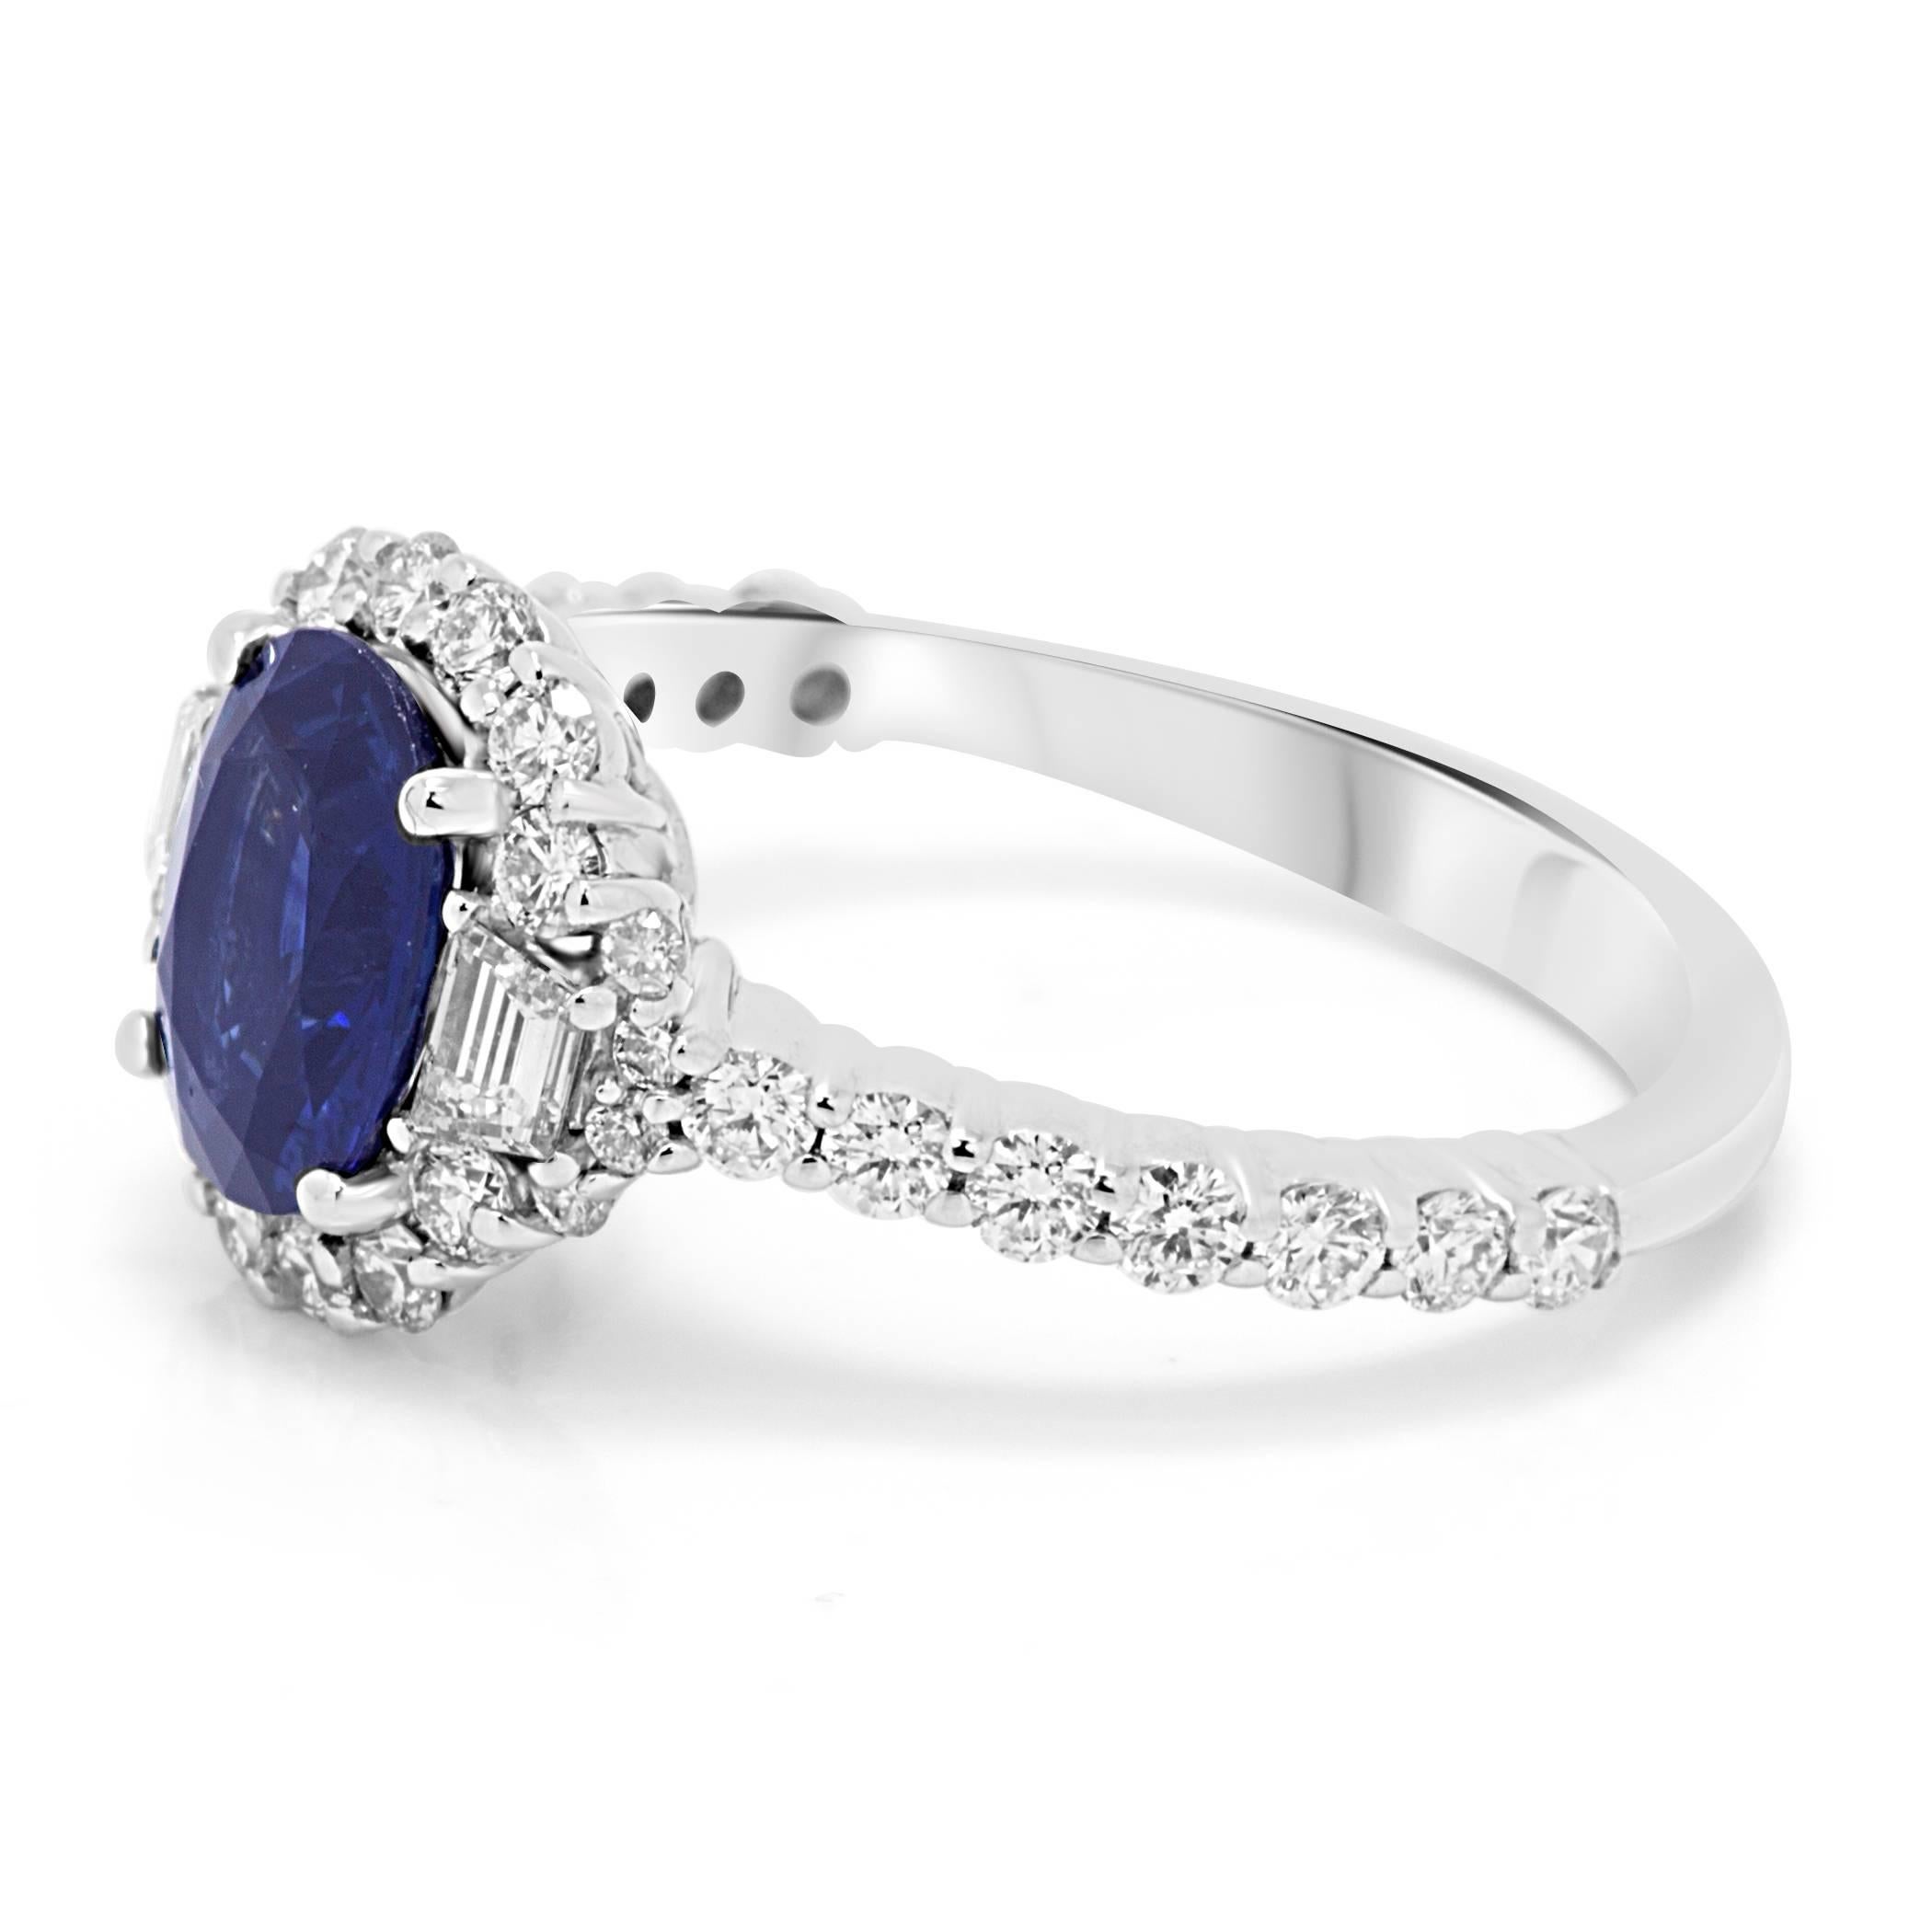 Blue Sapphire Oval 1.46 Carat encircled in a Halo of white Round Diamonds 0.61 Carat Flanked by 2 Diamond Trapezoids on the side 0.18 Carat in a gorgeous 18K White Gold Three stone Bridal Fashion Ring.

Style available in different price ranges.